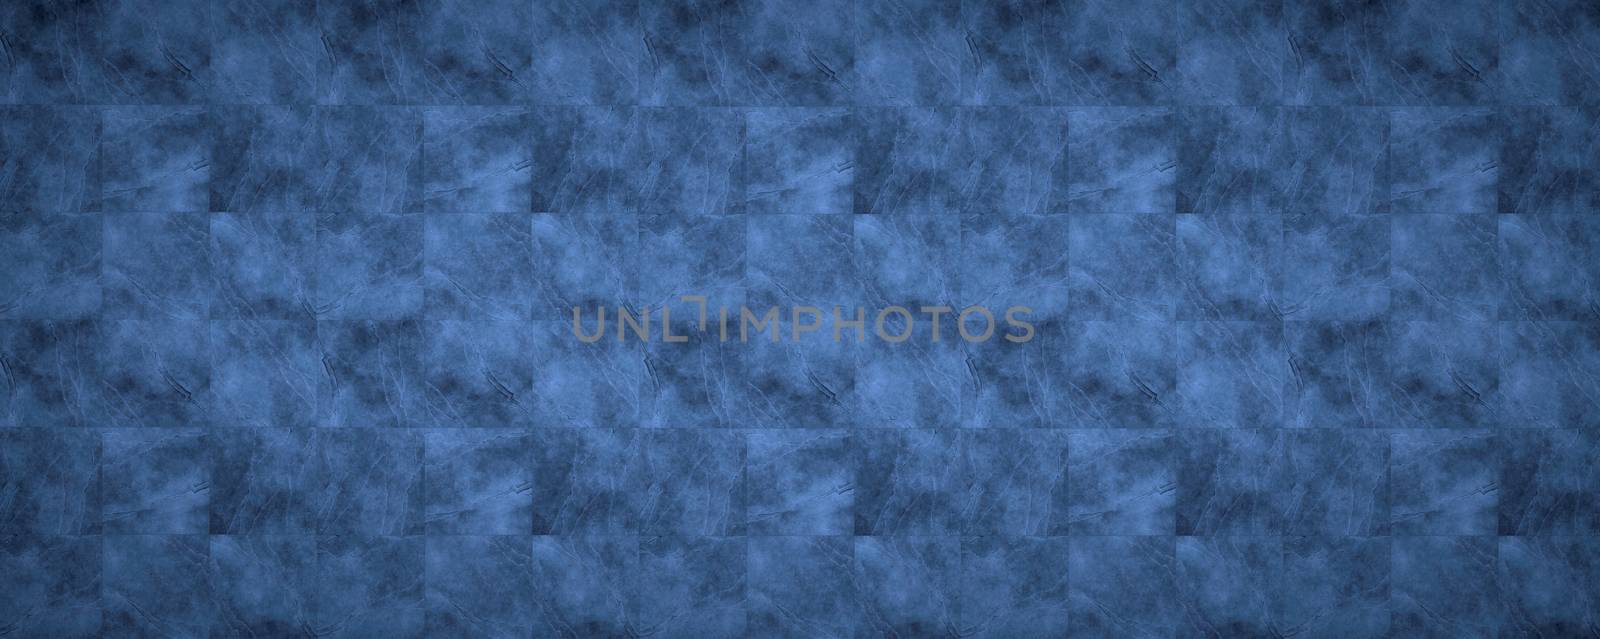 Background image showing a surface with the texture of marble on ceramic tiles in blue tones